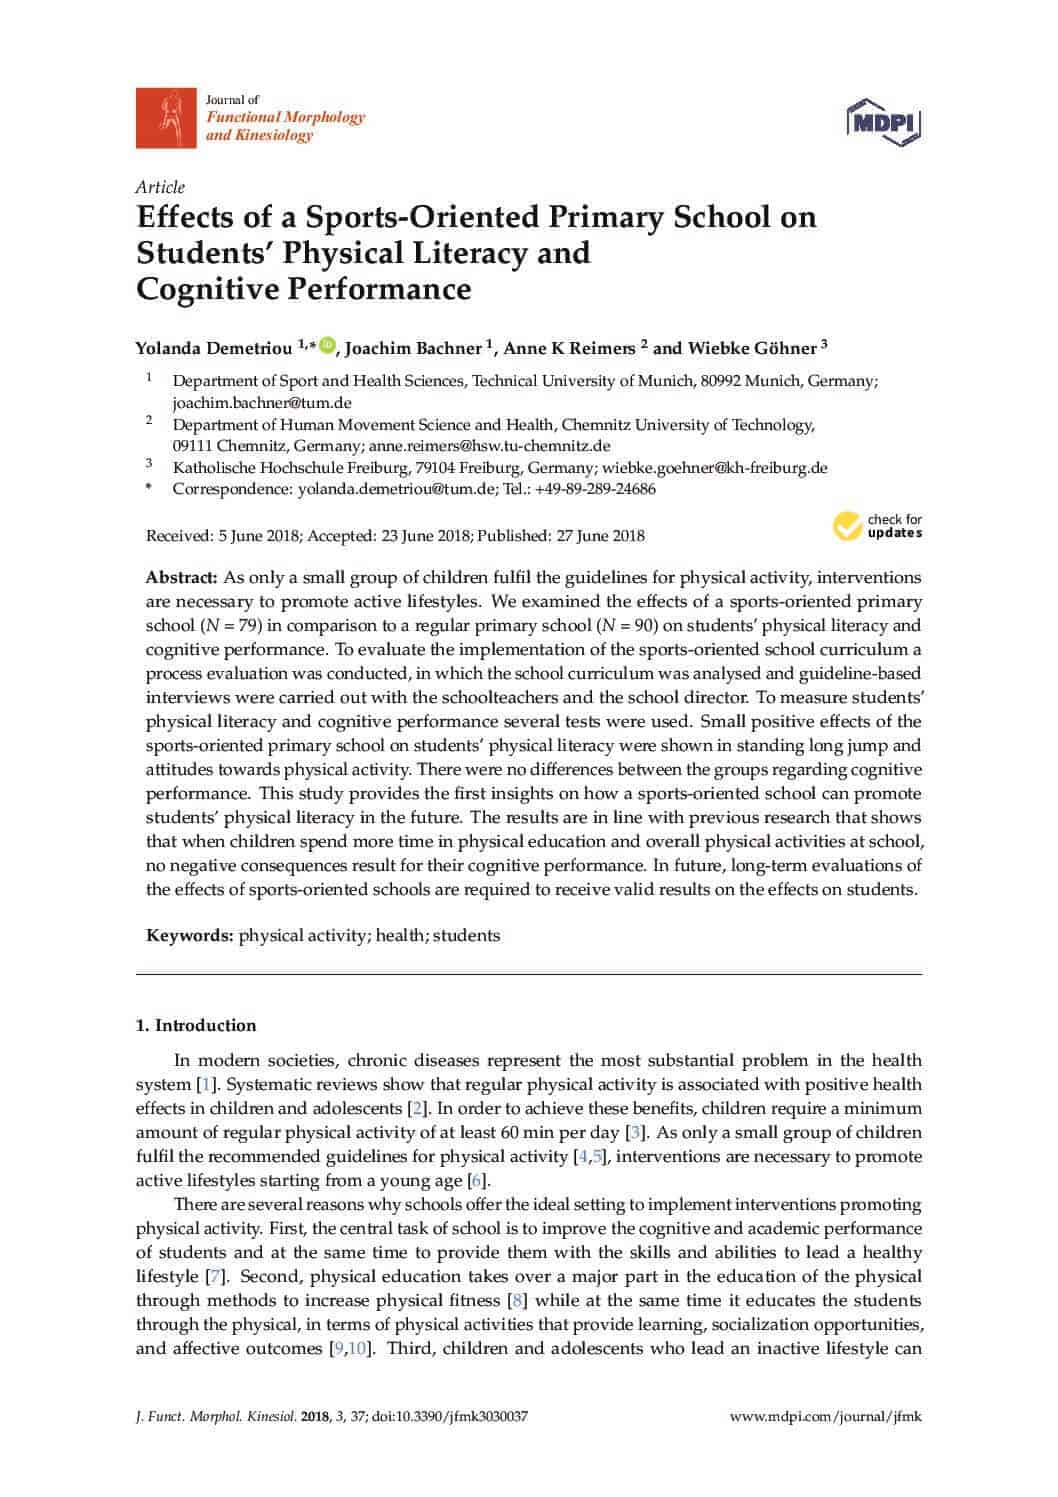 Effects of a Sports-Oriented Primary School on Students’ Physical Literacy and Cognitive Performance